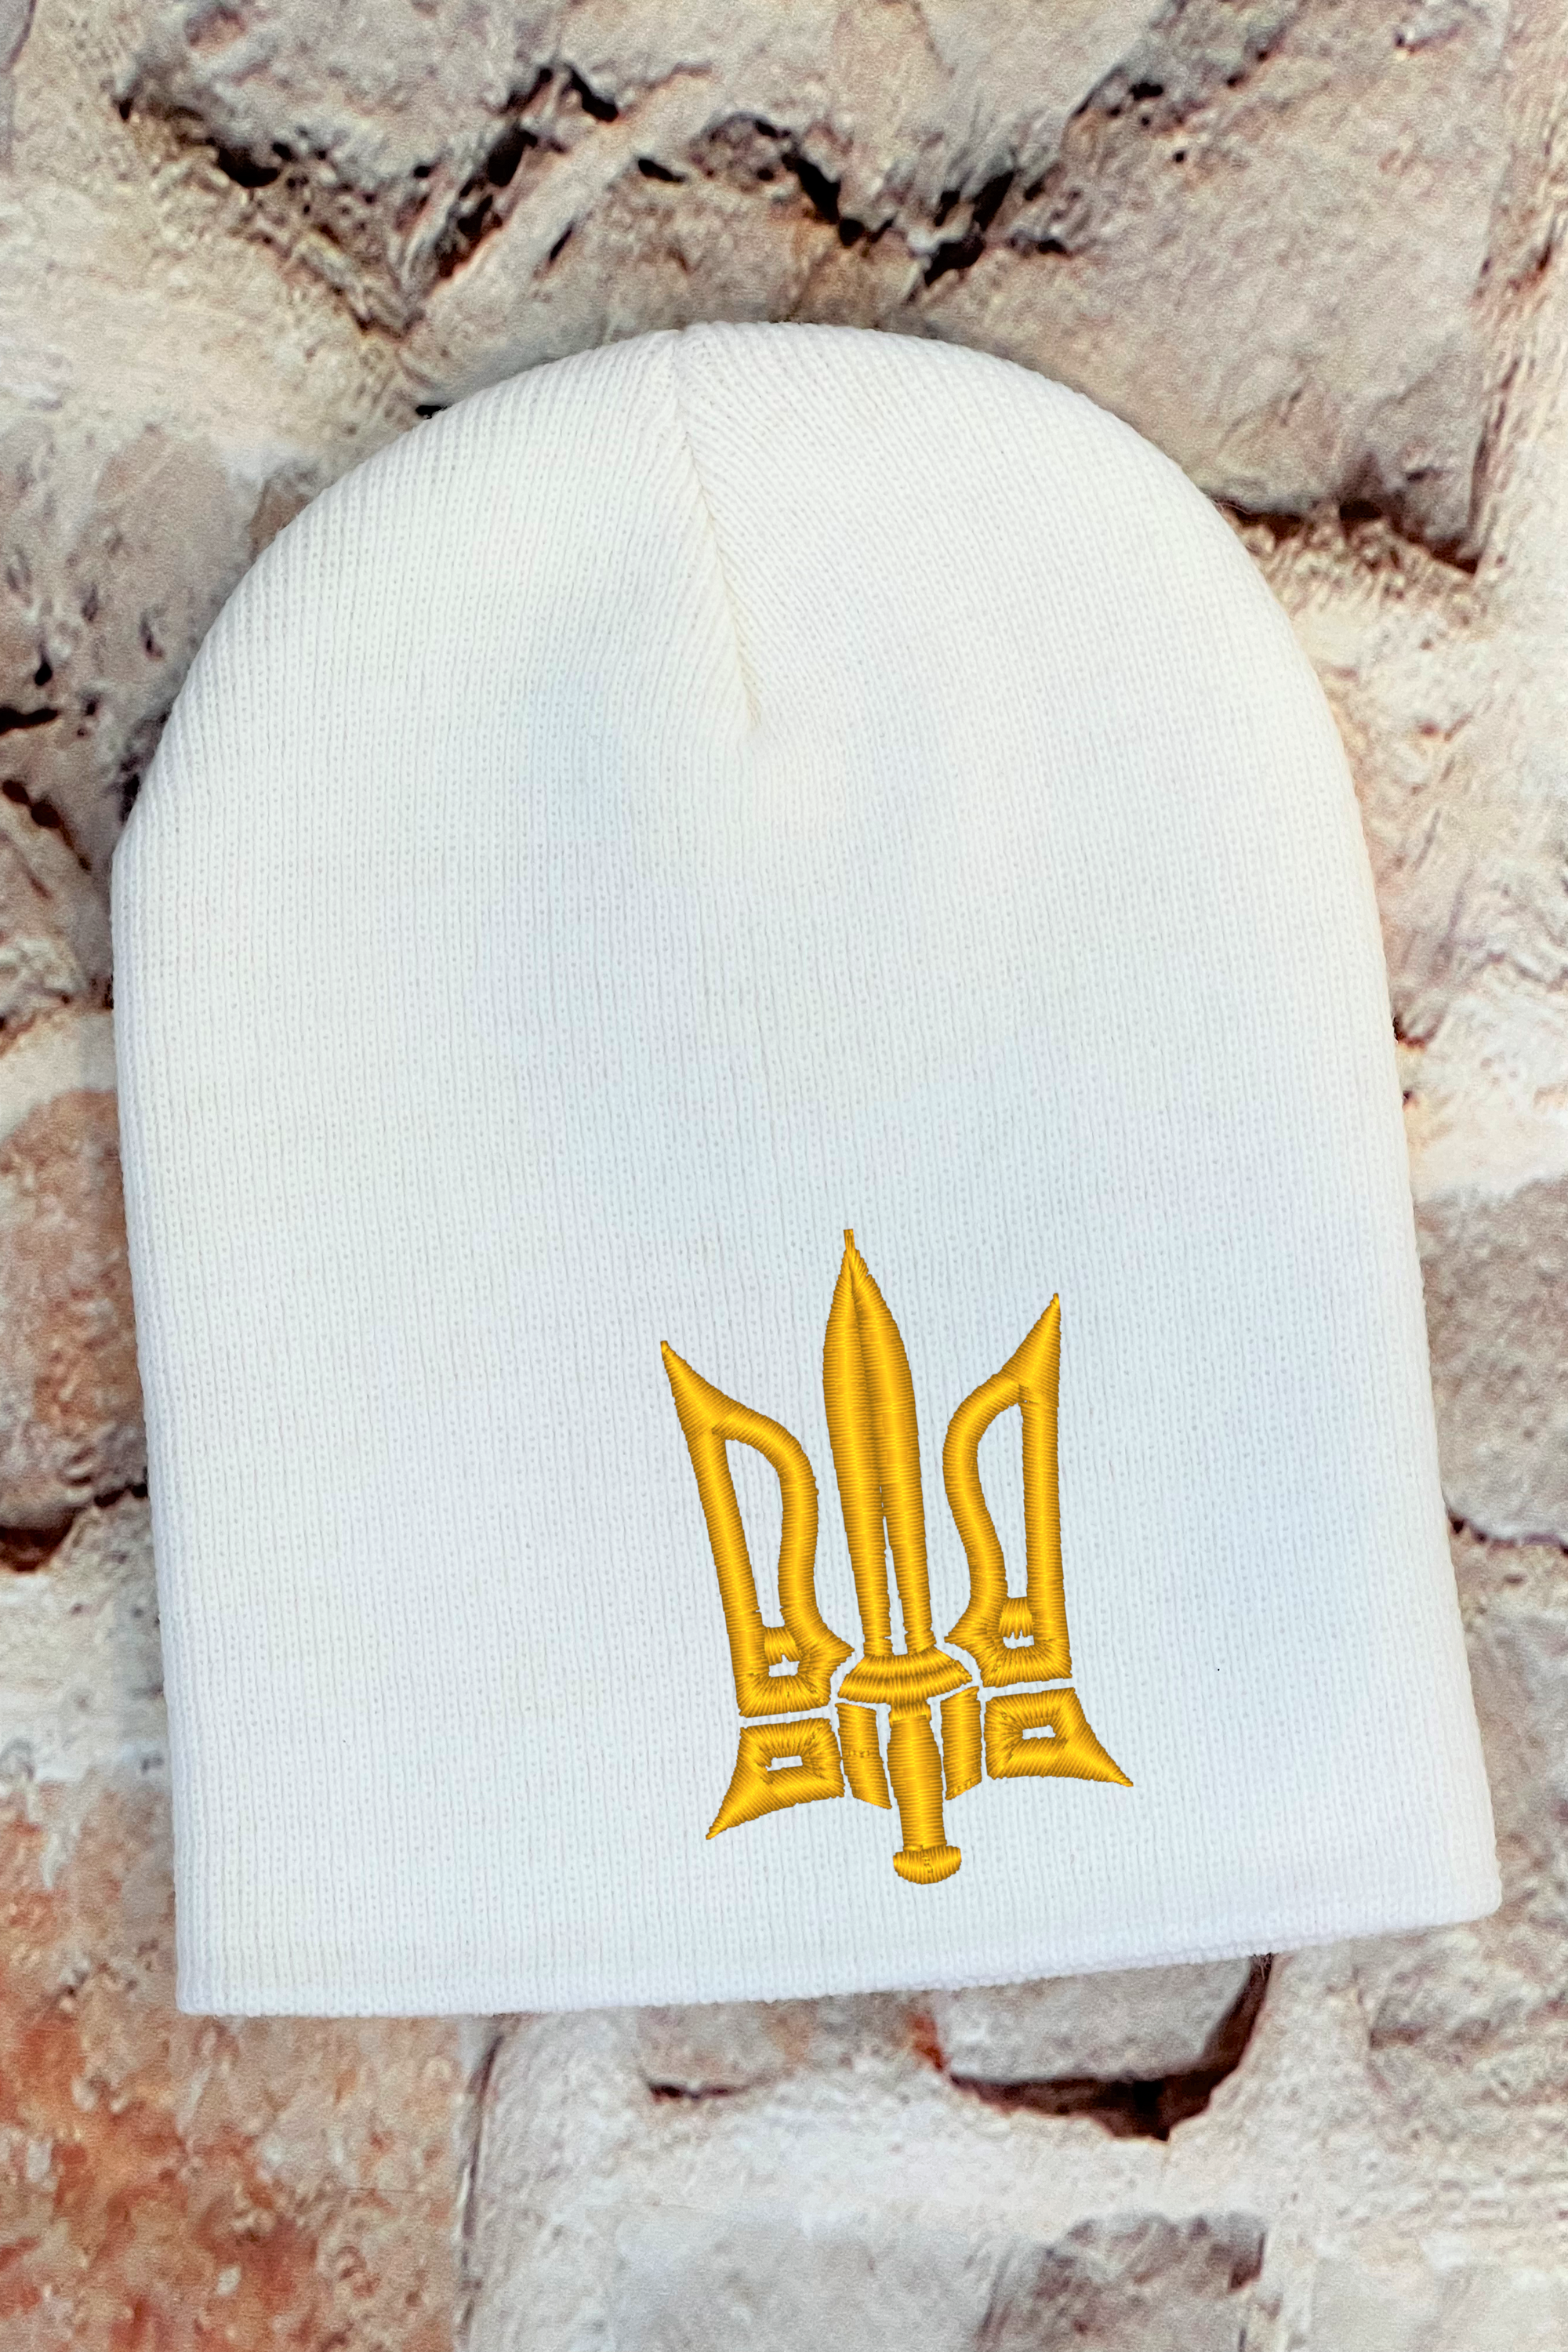 Knitted embroidered beanie hat "Combat Tryzub"